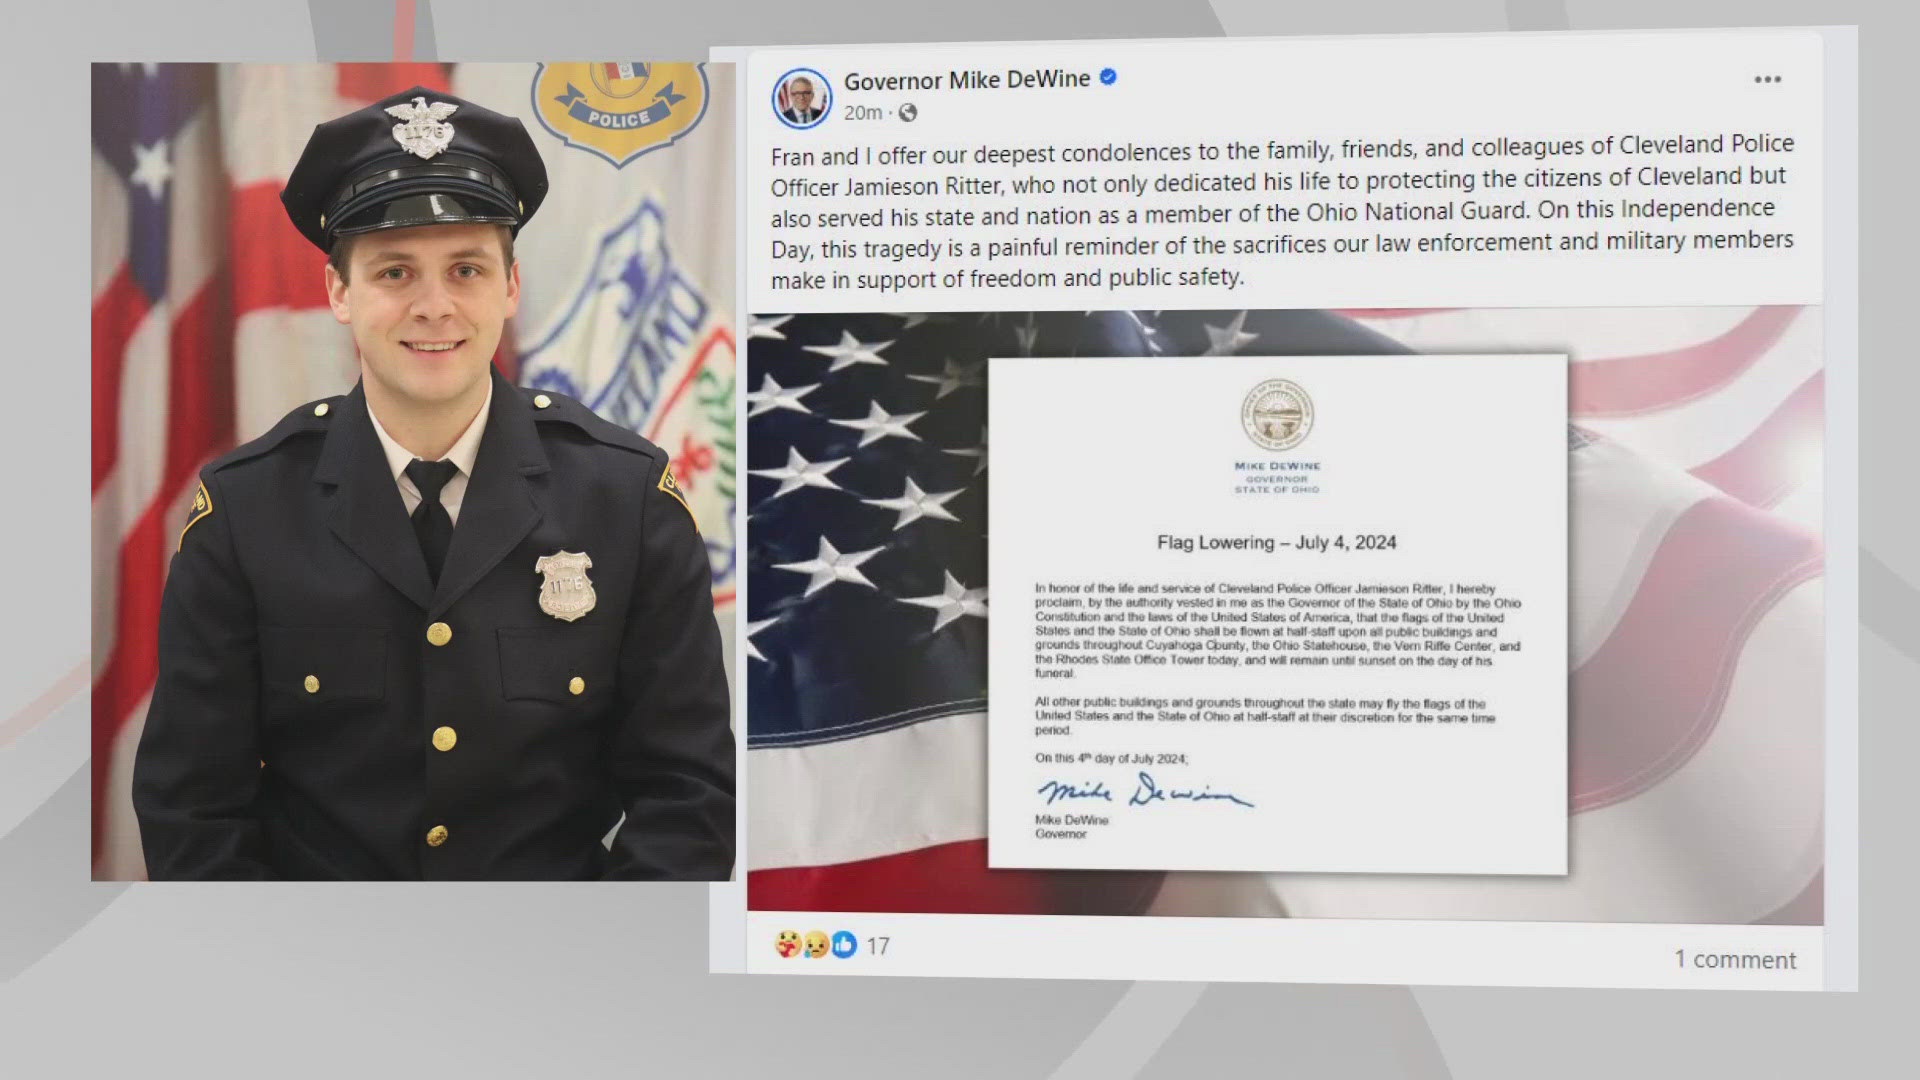 City, county, and state leaders posted messages of sympathy and tribute to fallen Cleveland police officer Jamieson Ritter on Thursday.